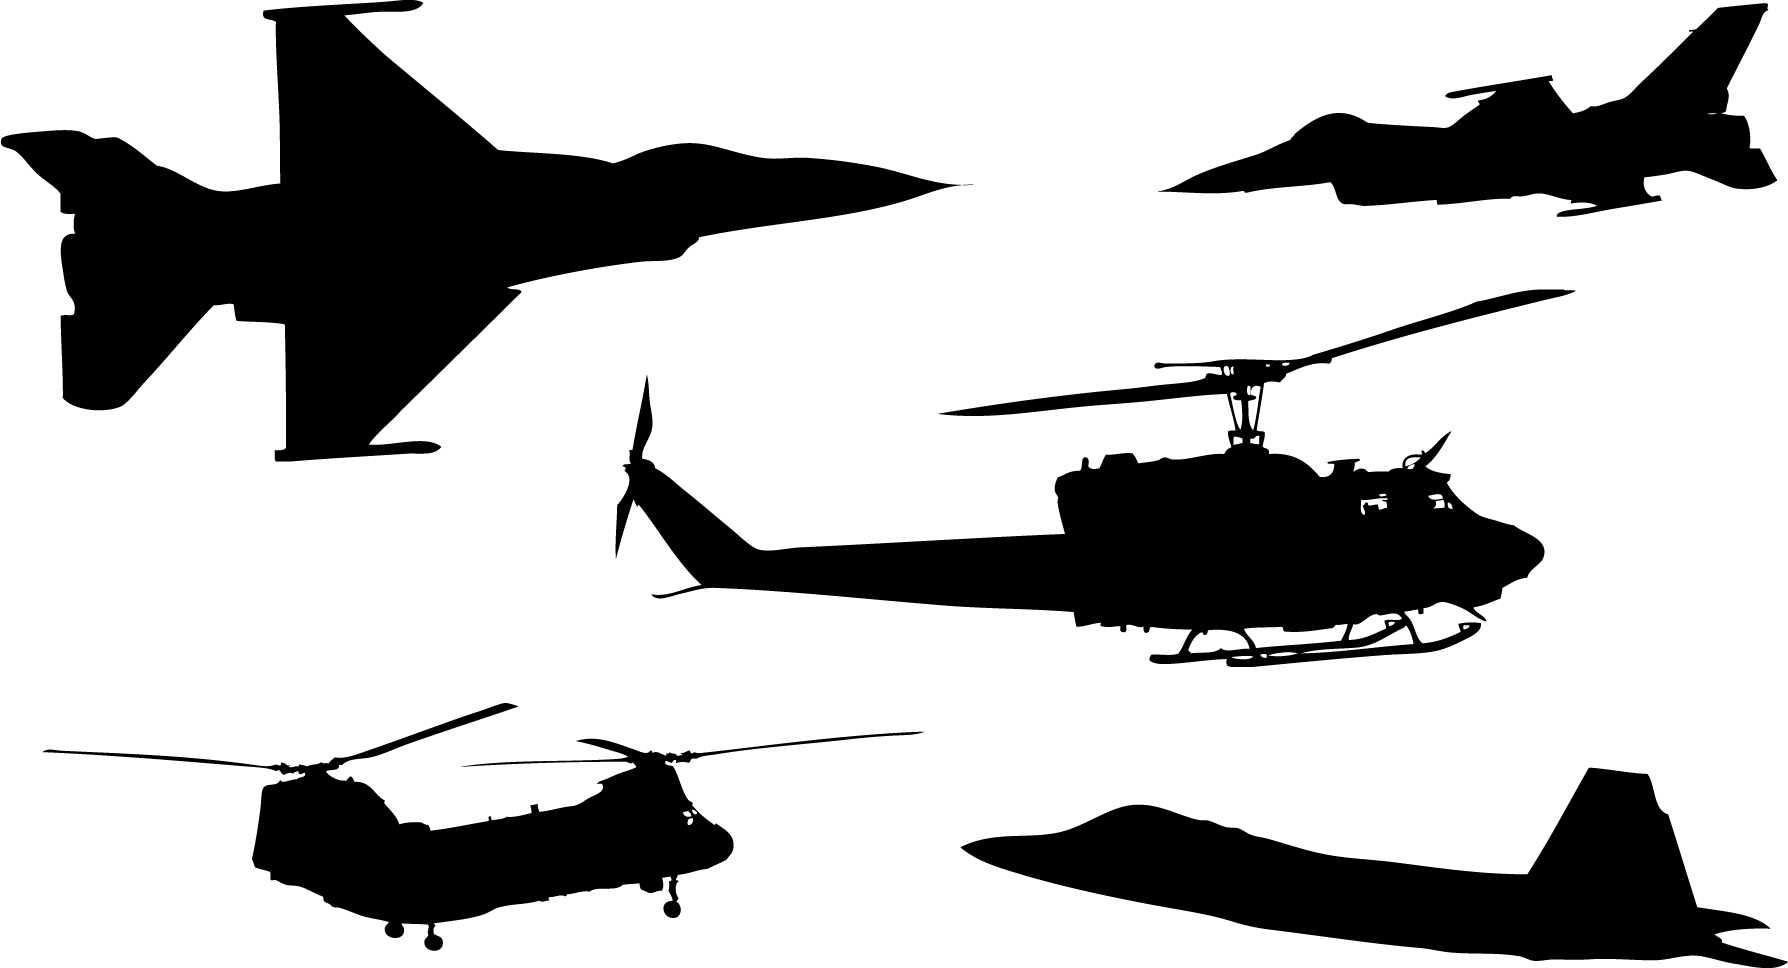 Airplane Silhouette Vector Free - ClipArt Best